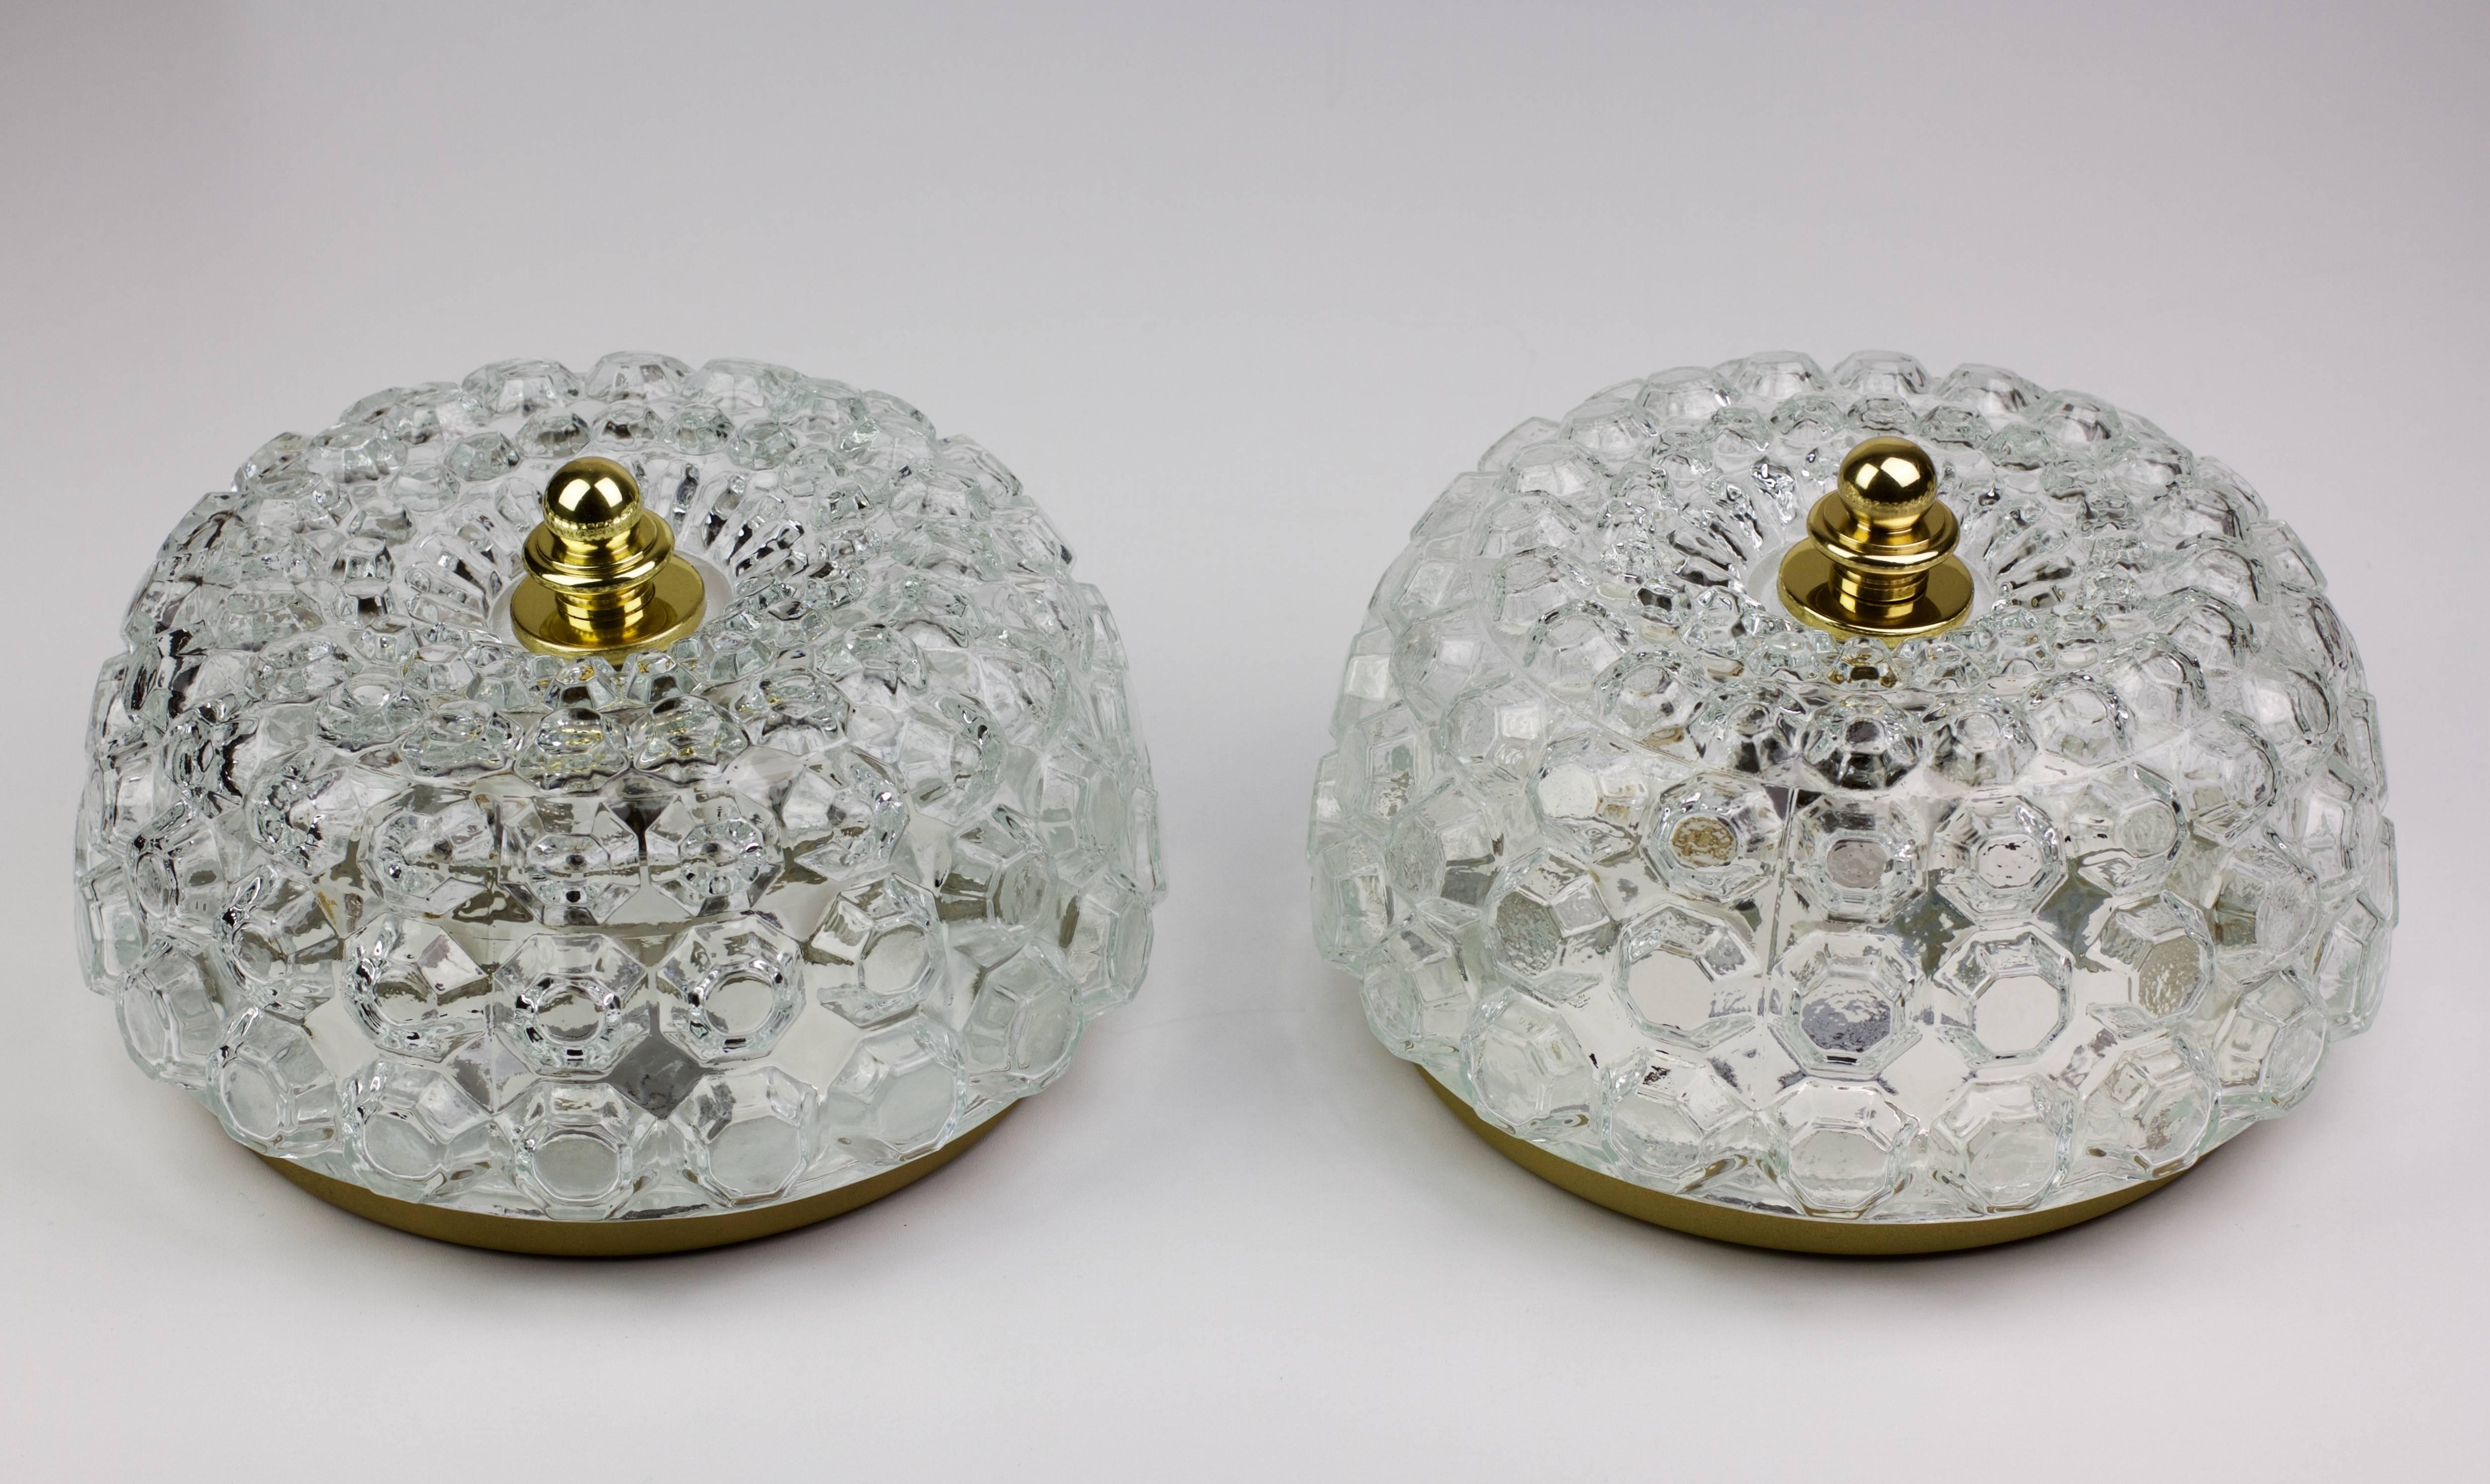 Elegant Mid-Century clear glass flush mount light fixtures by Helena Tynell for Glashütte Limburg, circa 1968. The honeycomb patterned design casts a stunning light through the crystal clear glass - whether wall or ceiling mounted the add a touch of